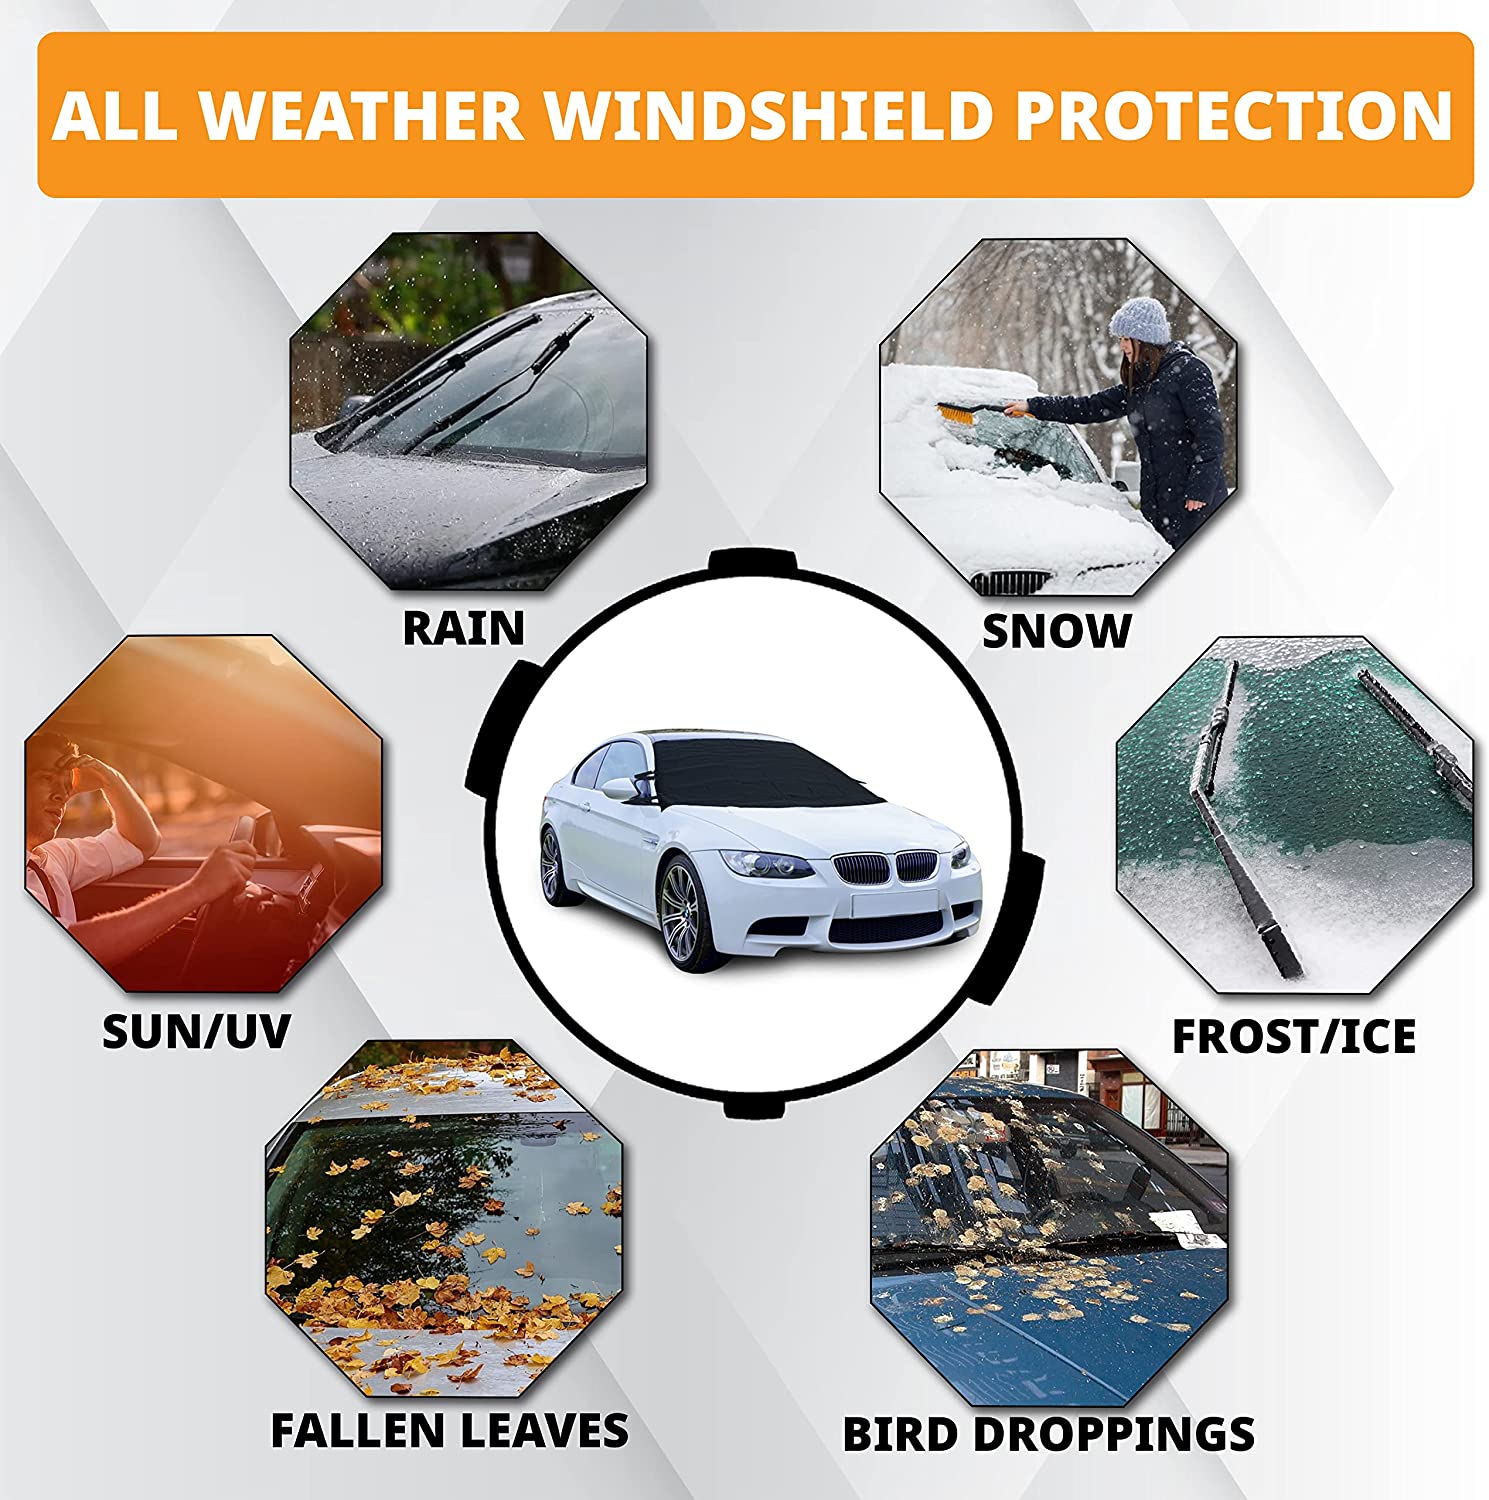 EcoNour Car Windshield Cover for Ice and Snow (69" x 42")| Exterior Automotive Water, Heat & Sag-Proof Snow Cover - image 4 of 8